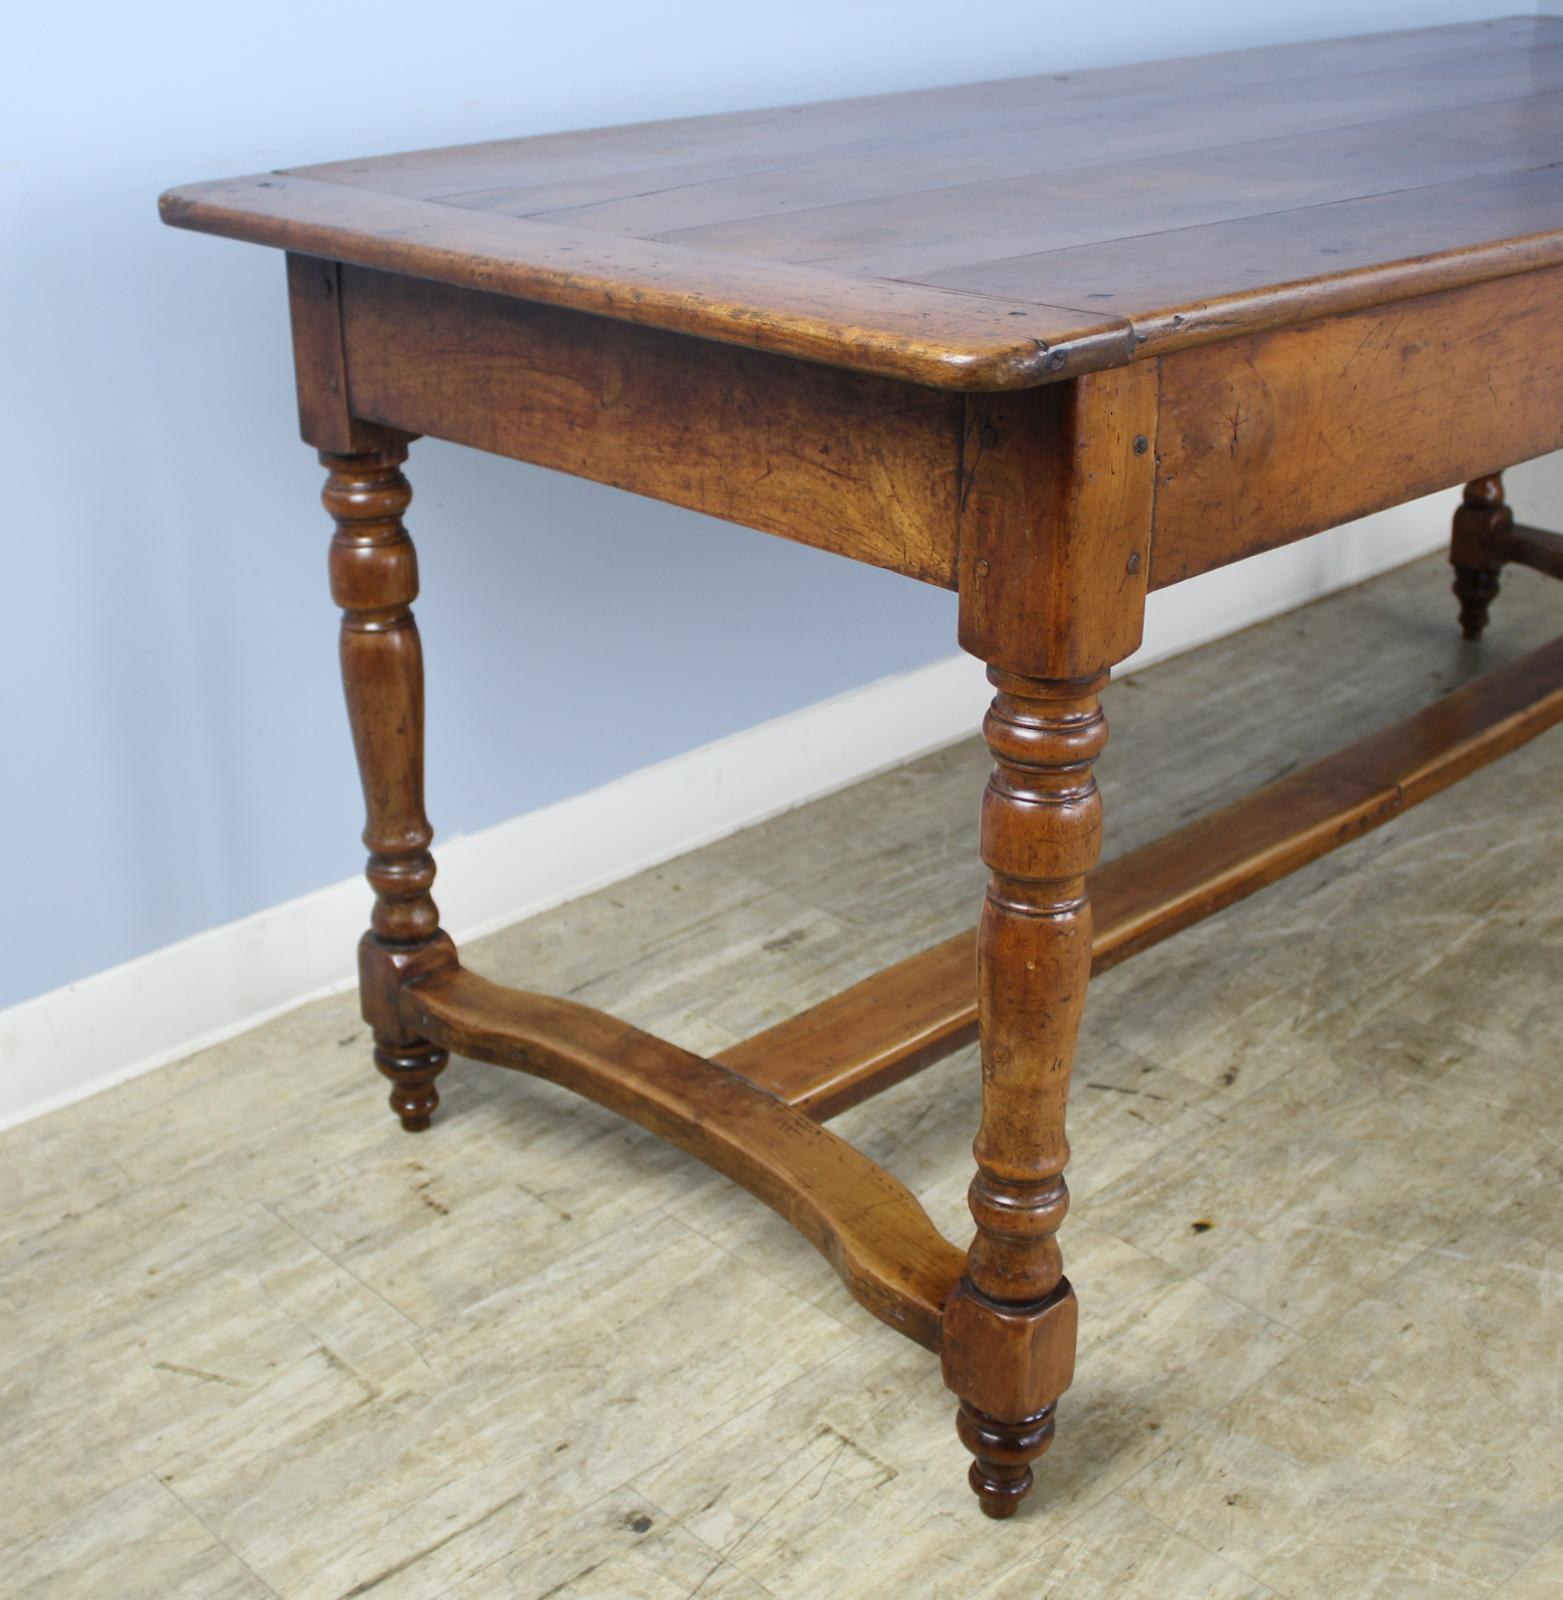 Fruitwood Early 19th Century Farm Table with Turned Legs and Stretcher Base